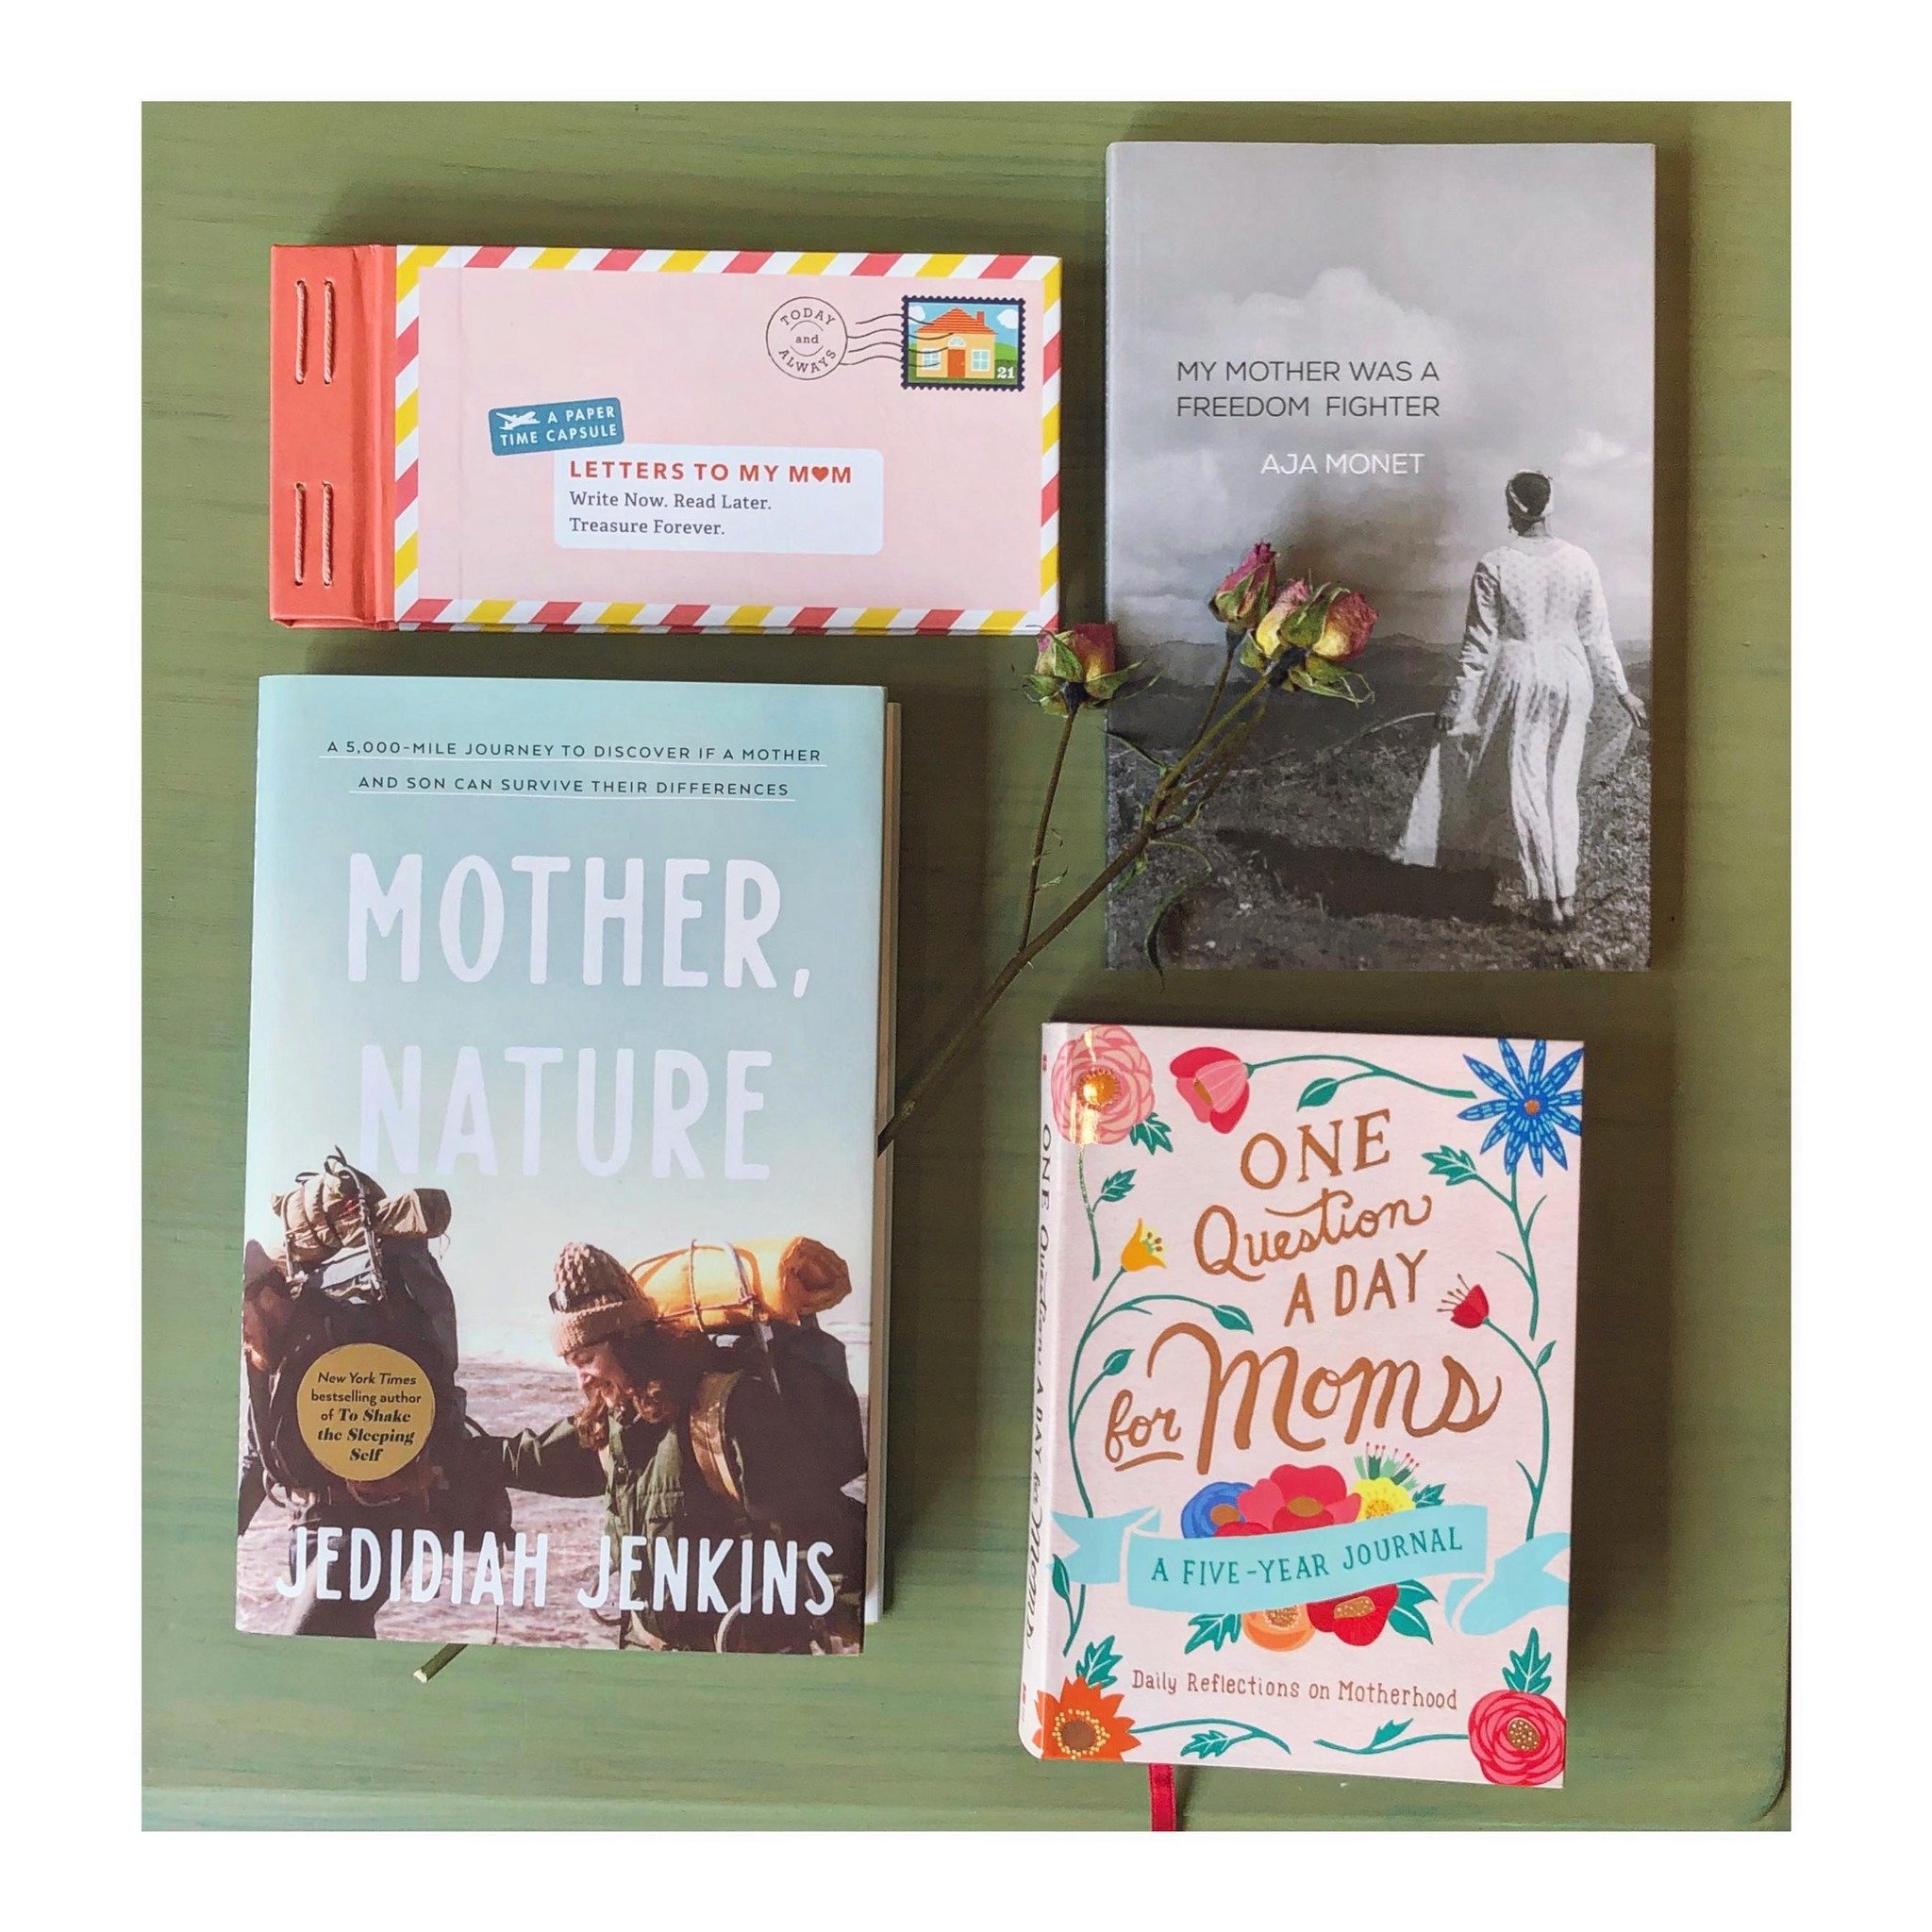 Looking for something unique for your Mama this Mother&rsquo;s Day? 💝 You&rsquo;re sure to find something special at the shop (and I hear gift certificates go over GREAT with book loving moms, too!) Hope to see you soon! 💐

*******

#mothersday #gl